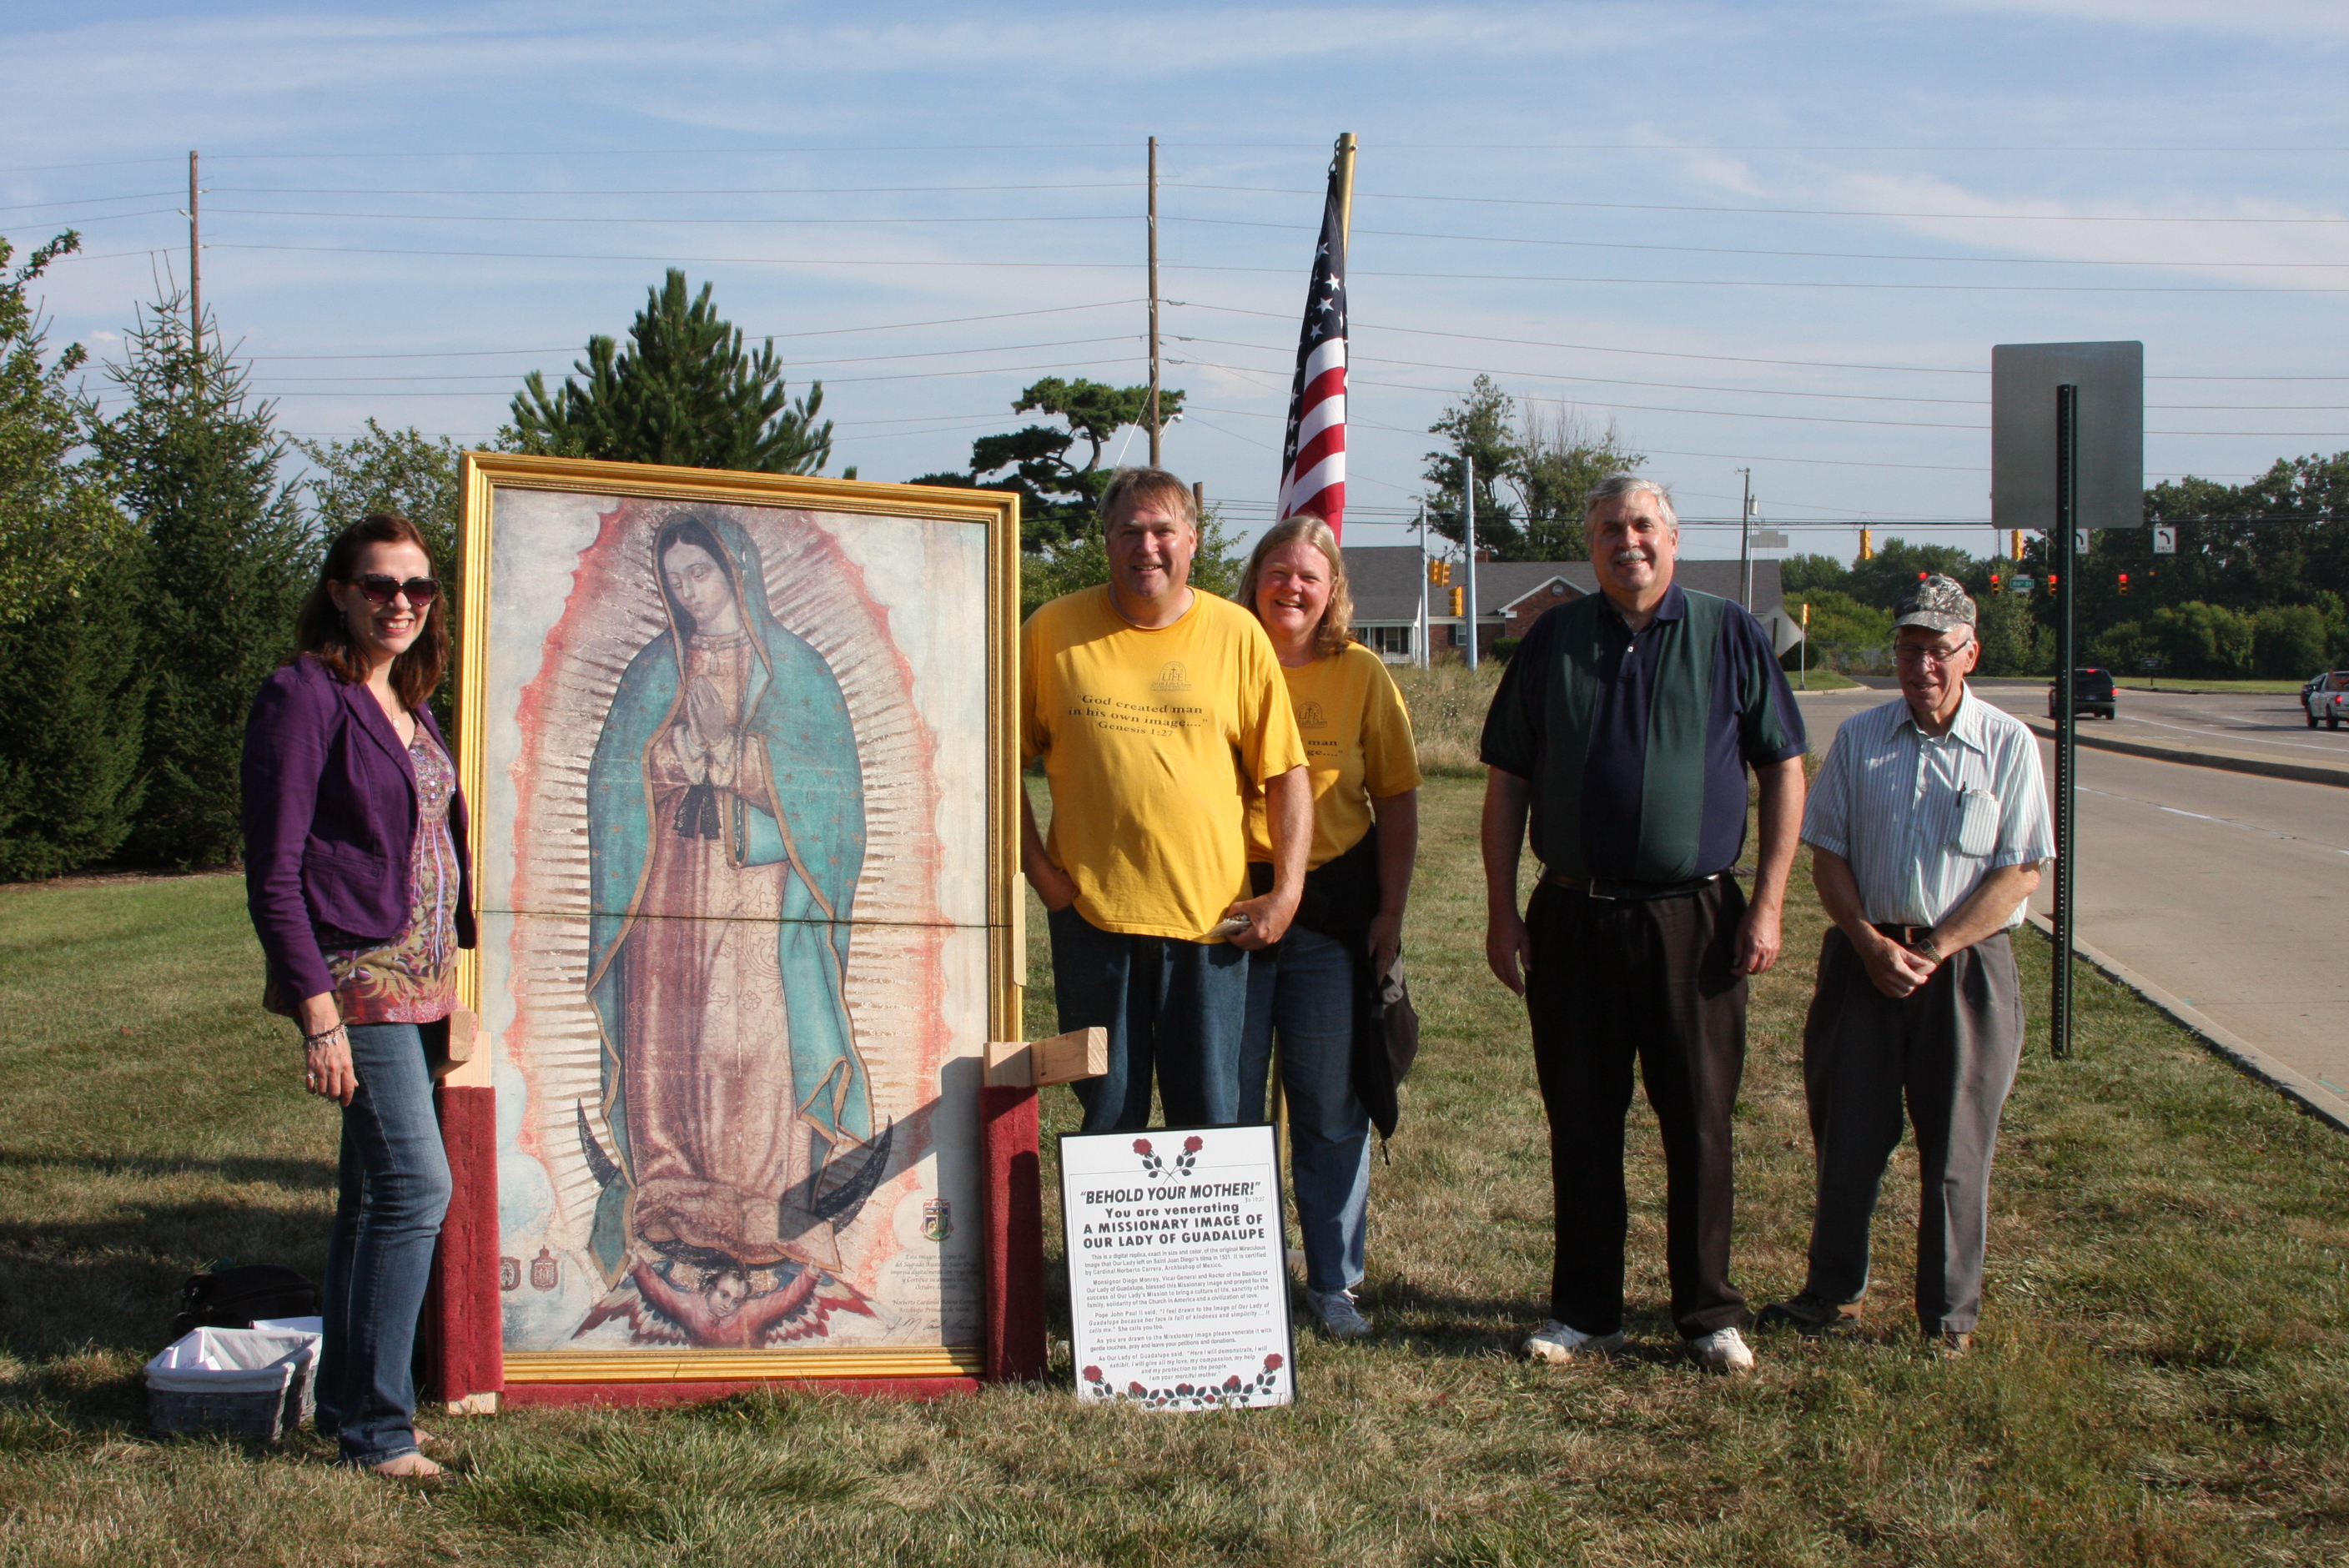 Missionary image of Our Lady of Guadalupe at Planned Parenthood2816 x 1880